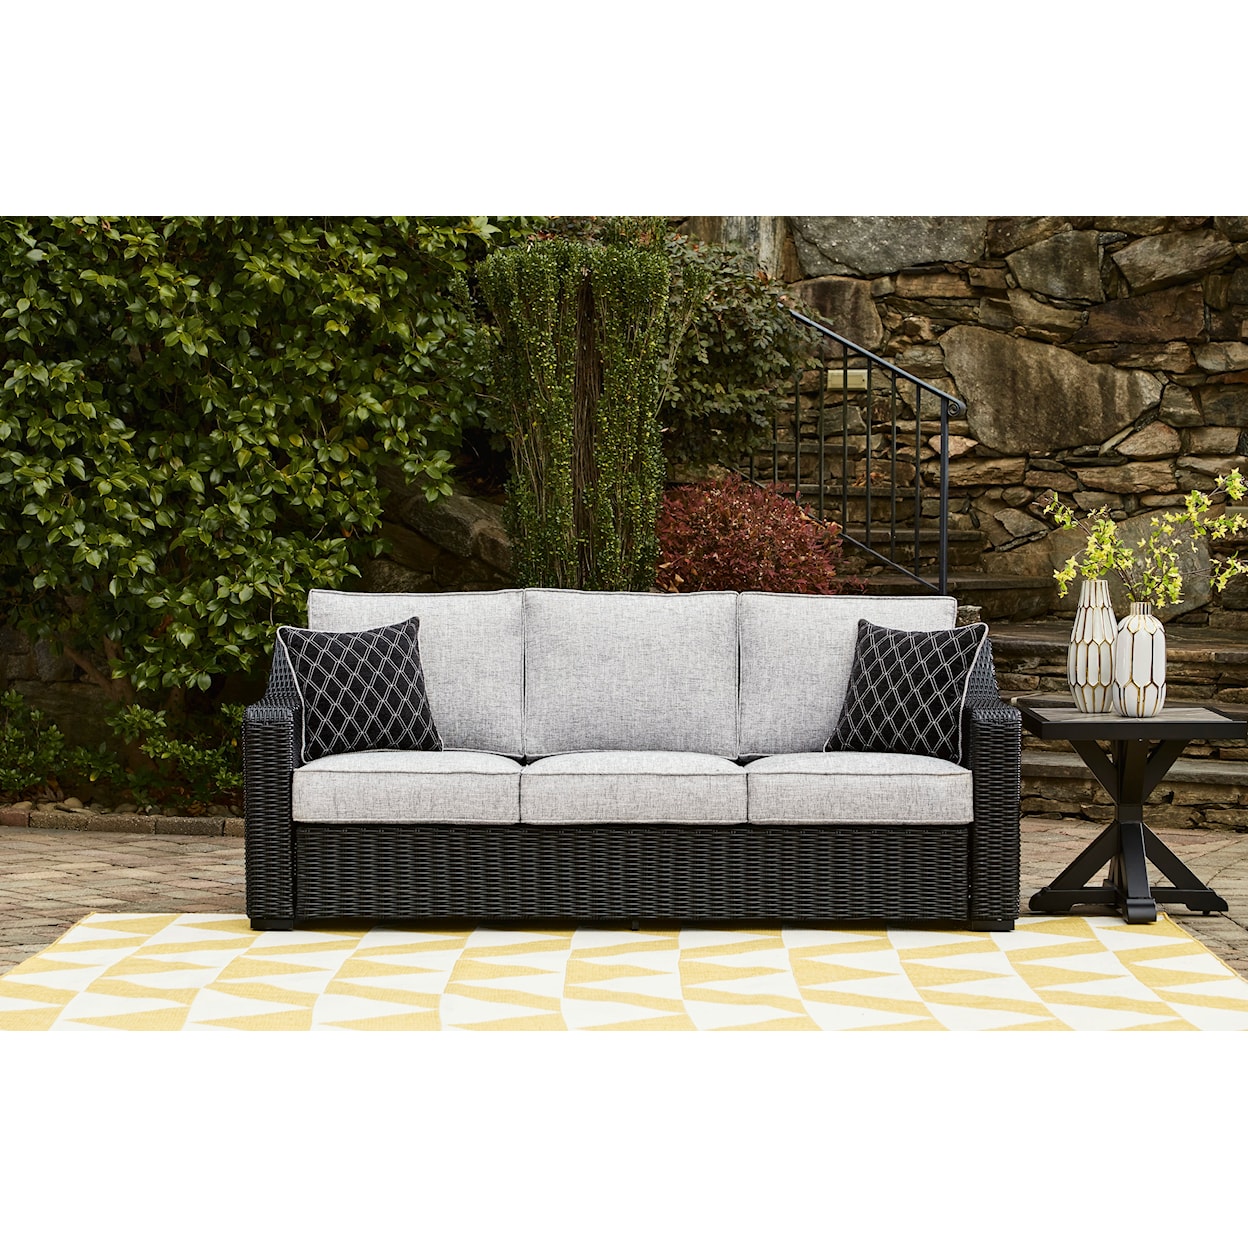 Belfort Select Bethany Outdoor Sofa With Cushion